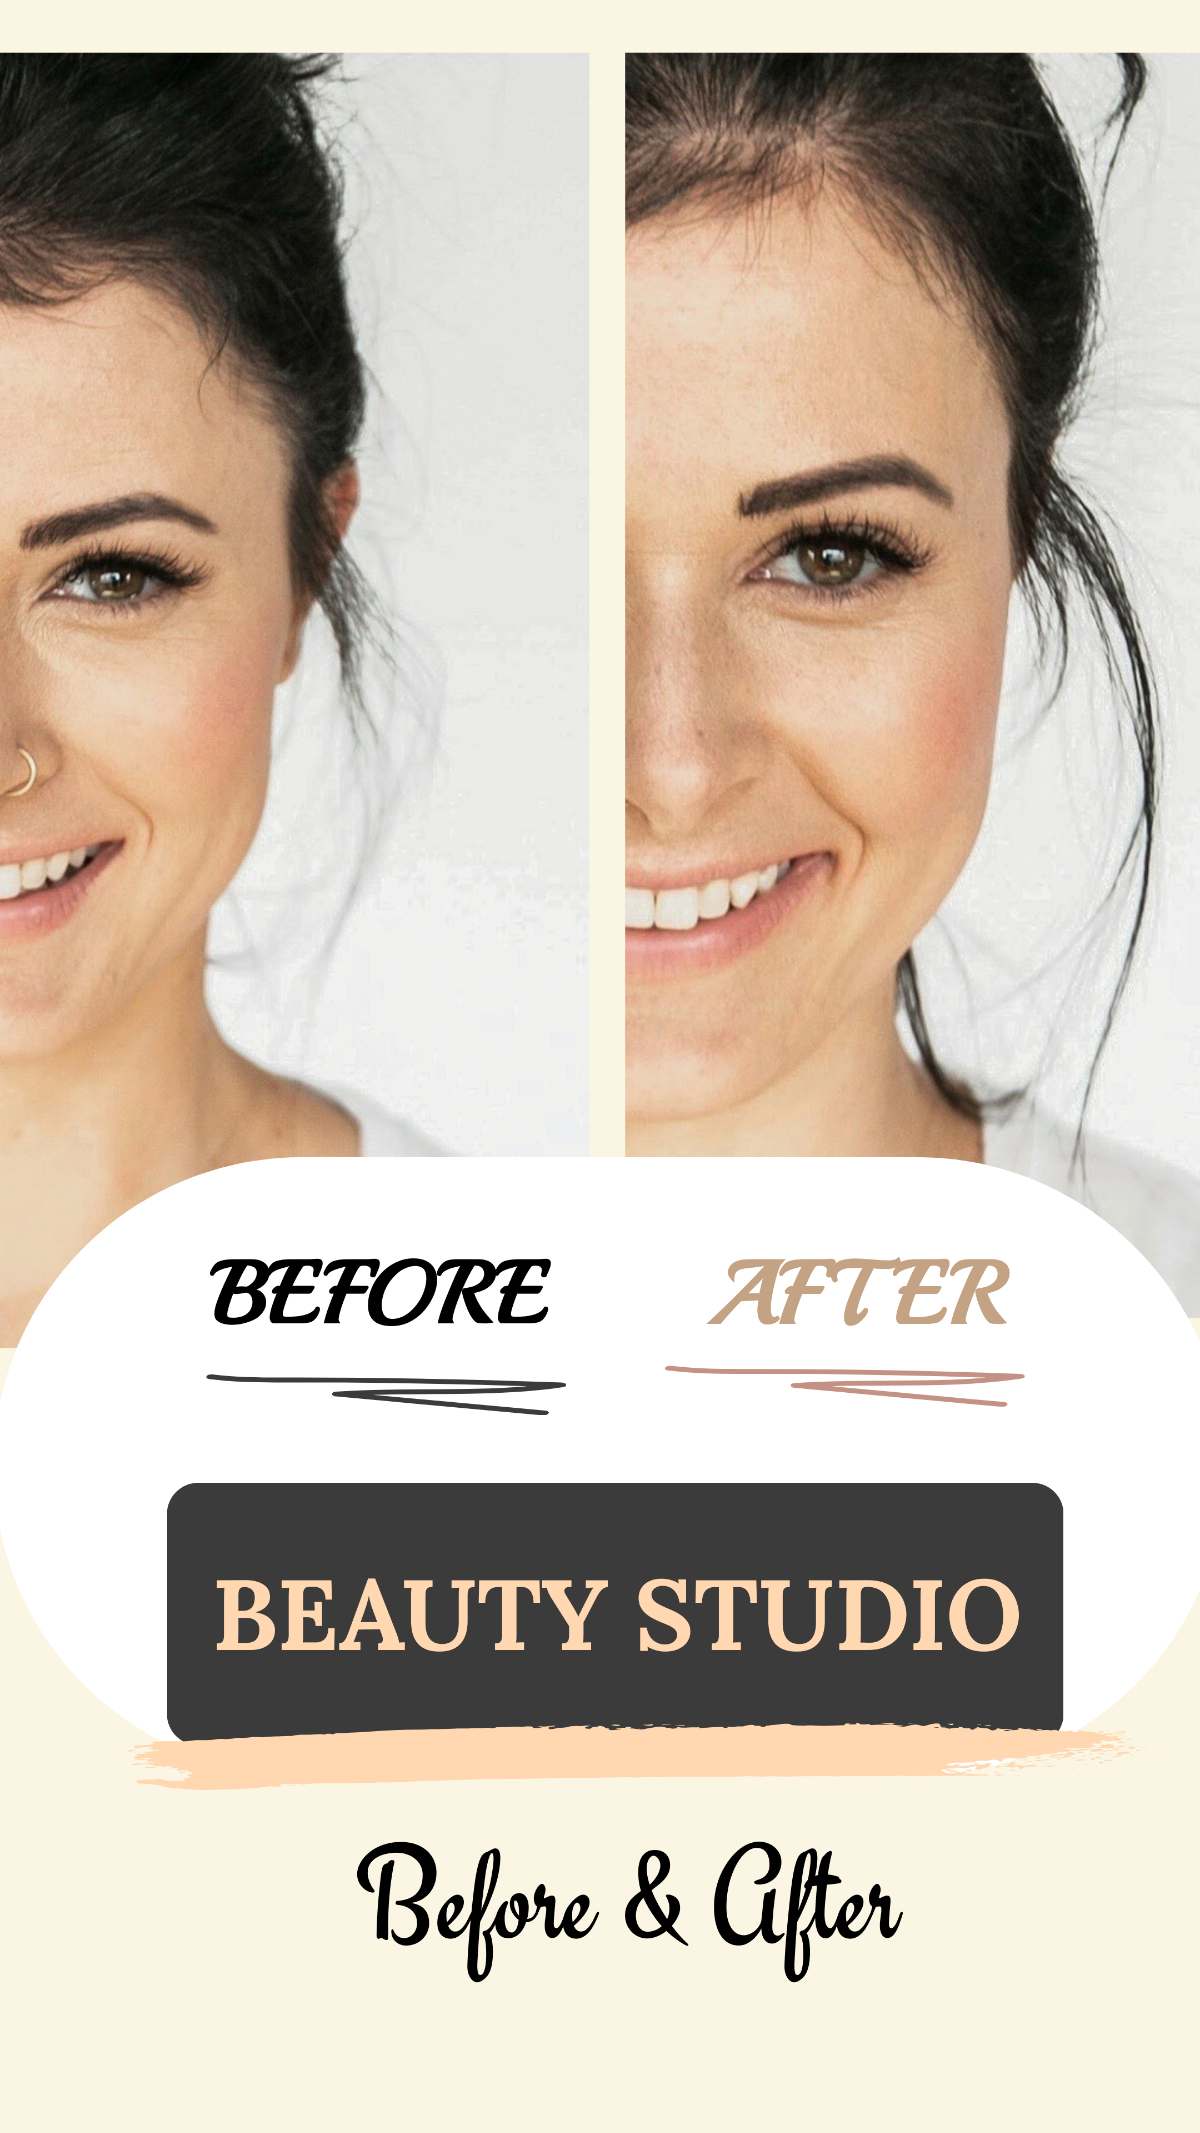 Beauty Studio Before and After Pinterest Pin